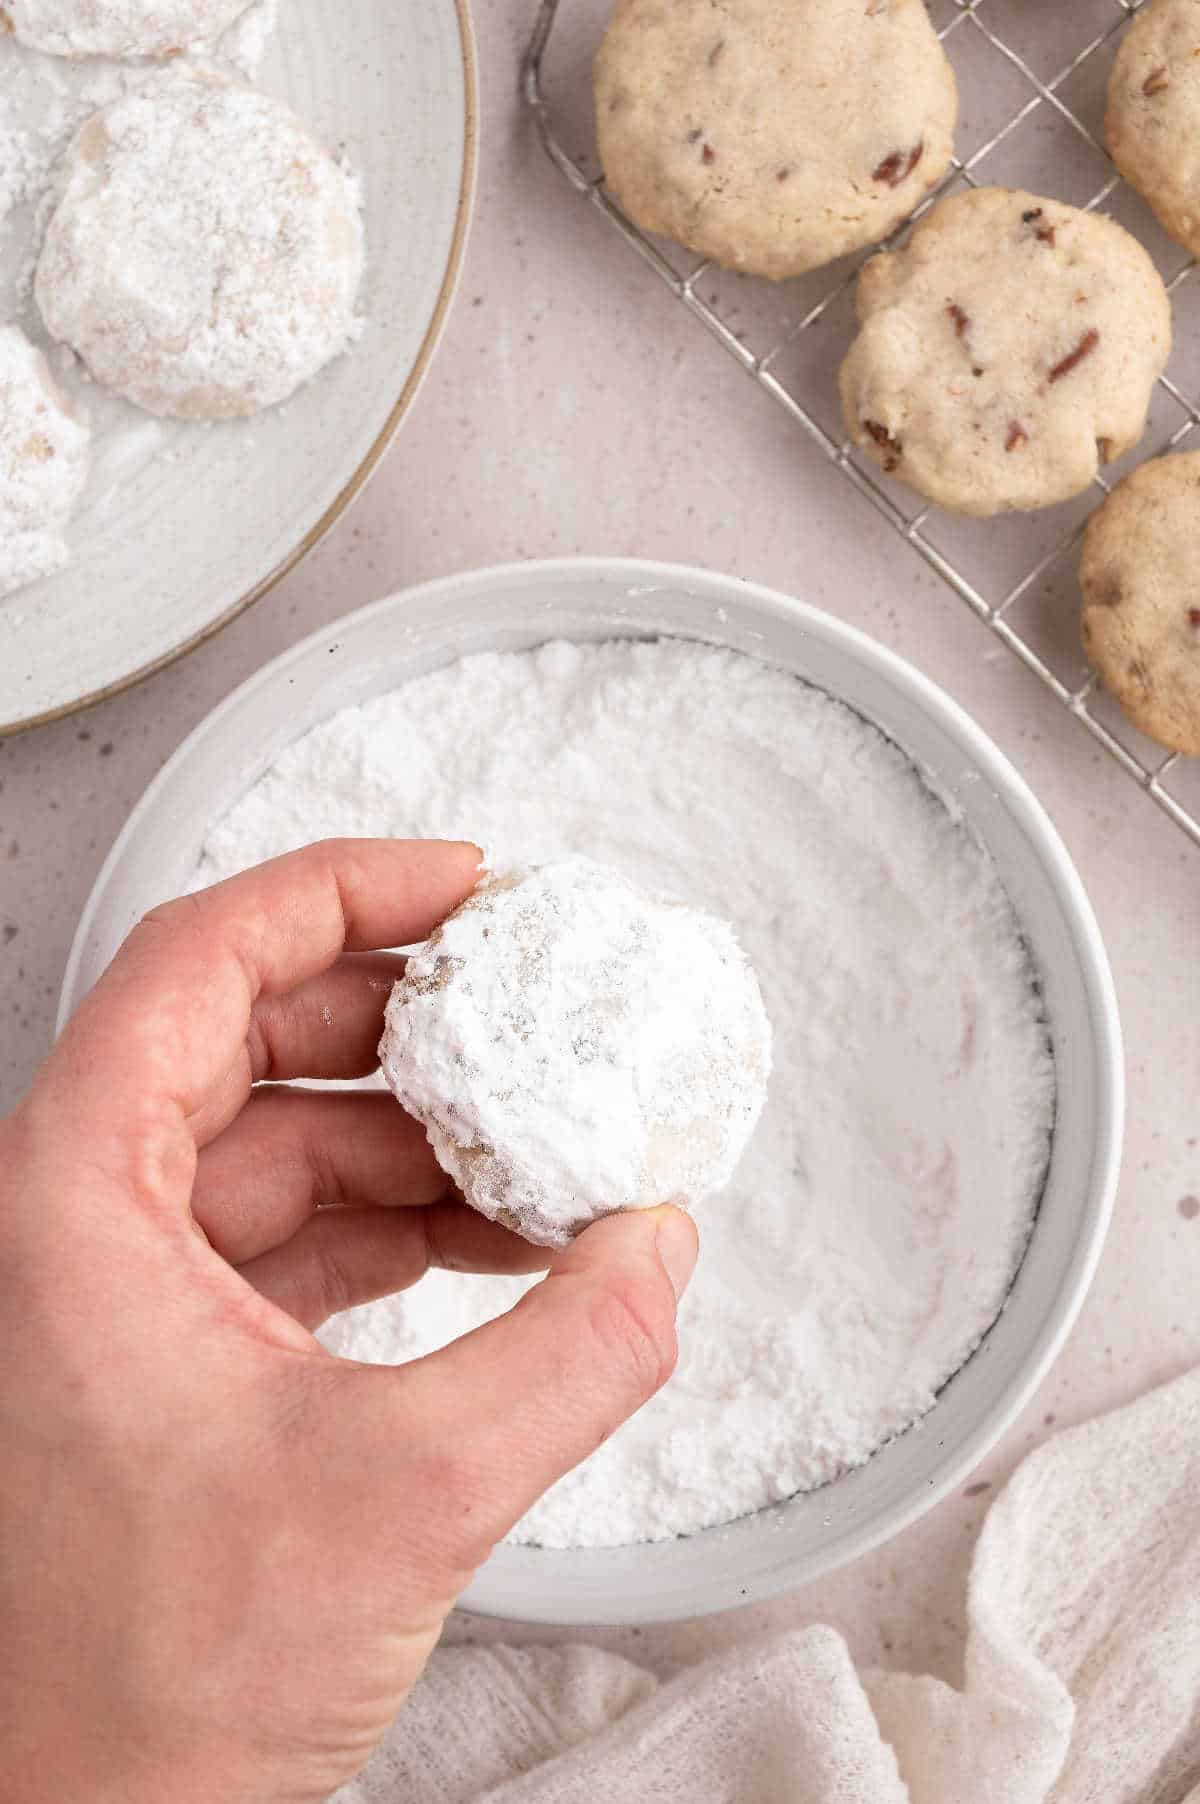 Hand holding pecan sandie cookie over bowl that has been dipped in powder sugar.